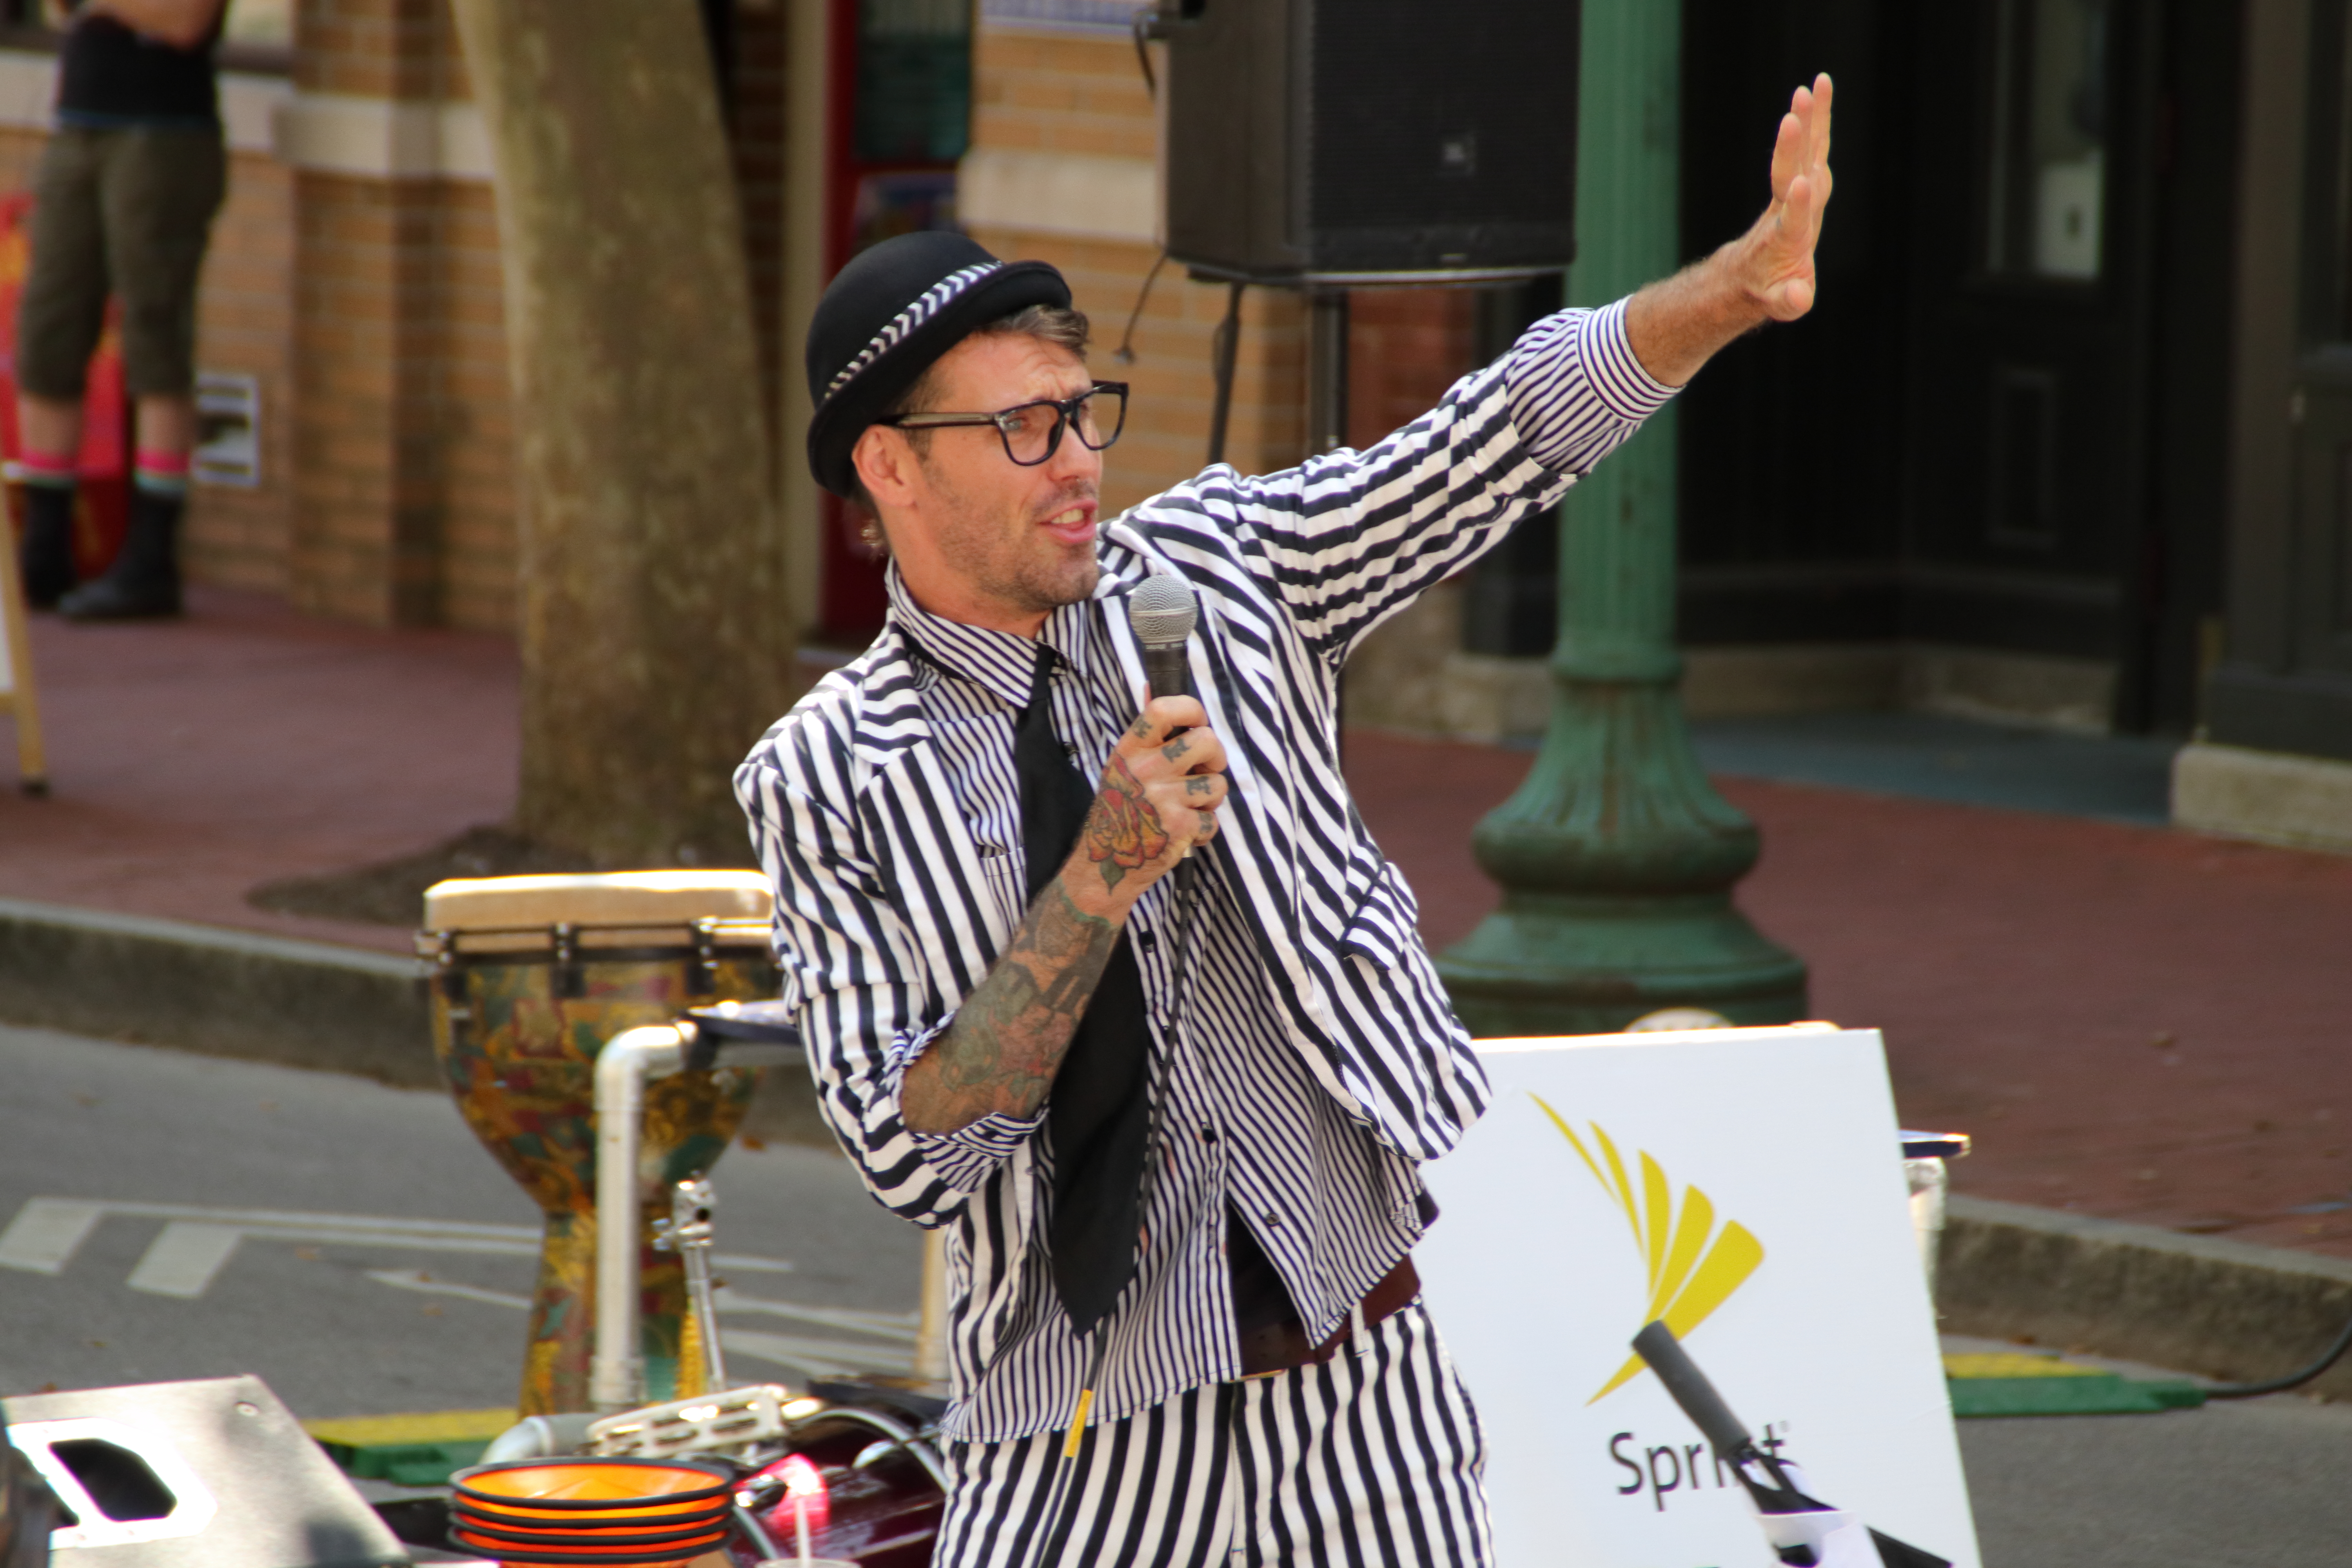 Magician in striped suit and bowler hat performing